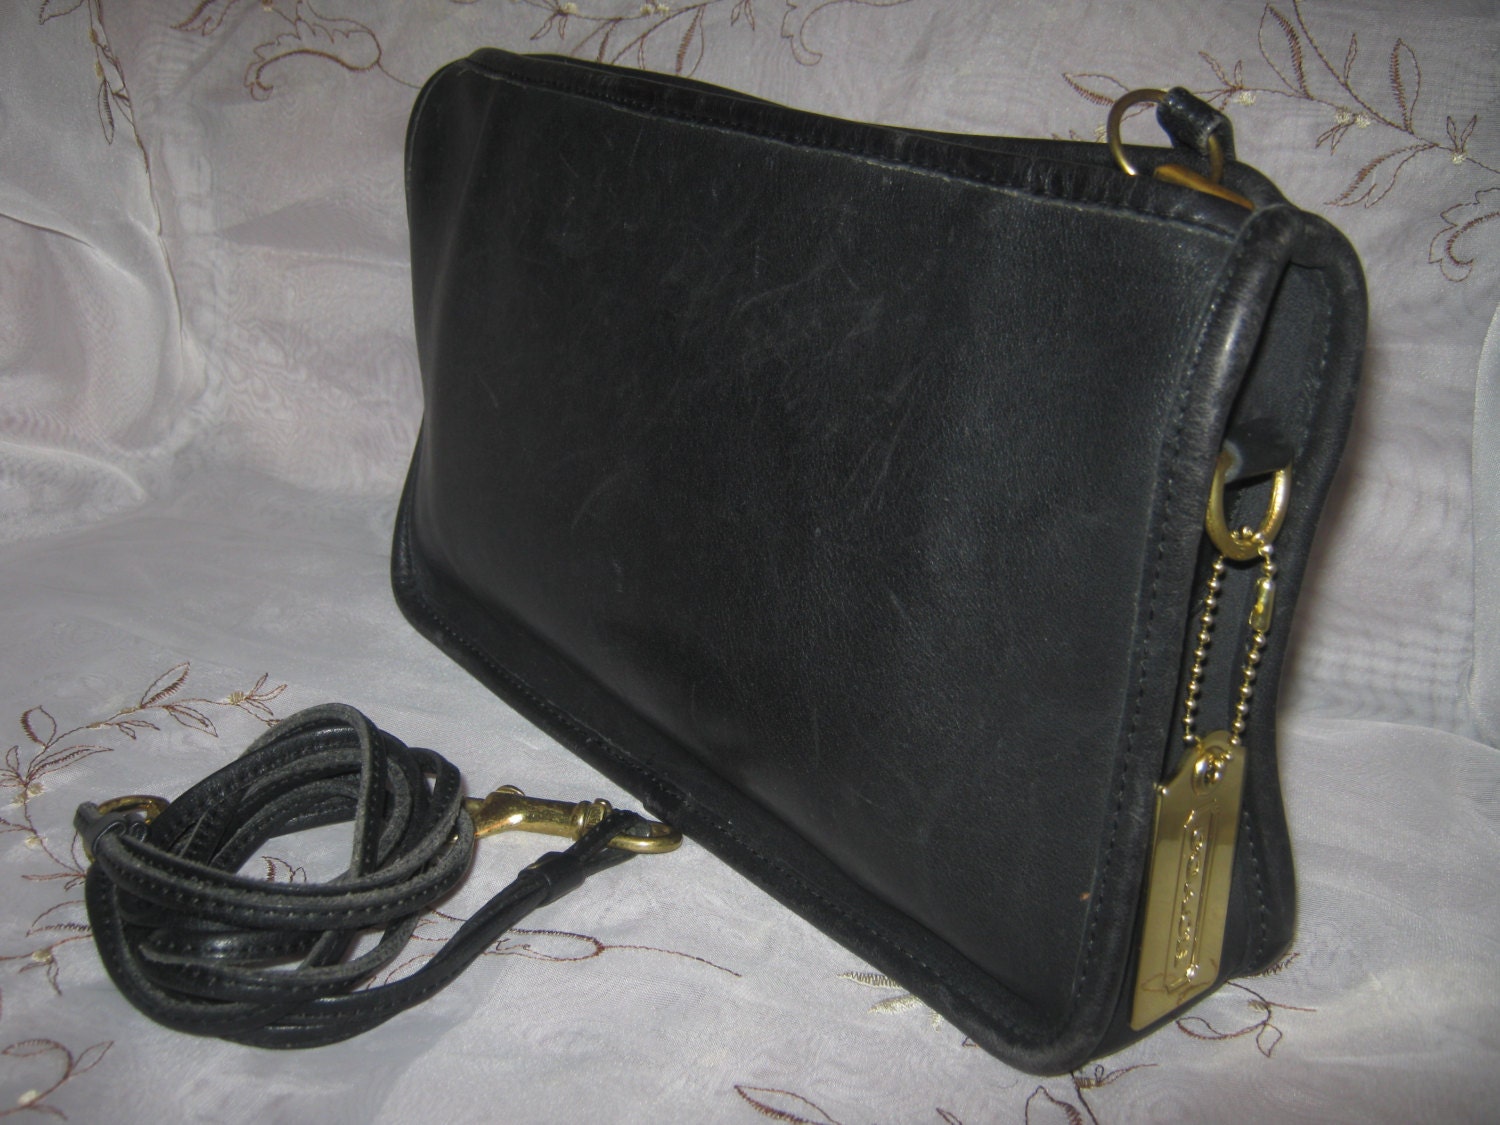 Vintage Coach NYC 80s Basic Classic Bag Leather Black Chic